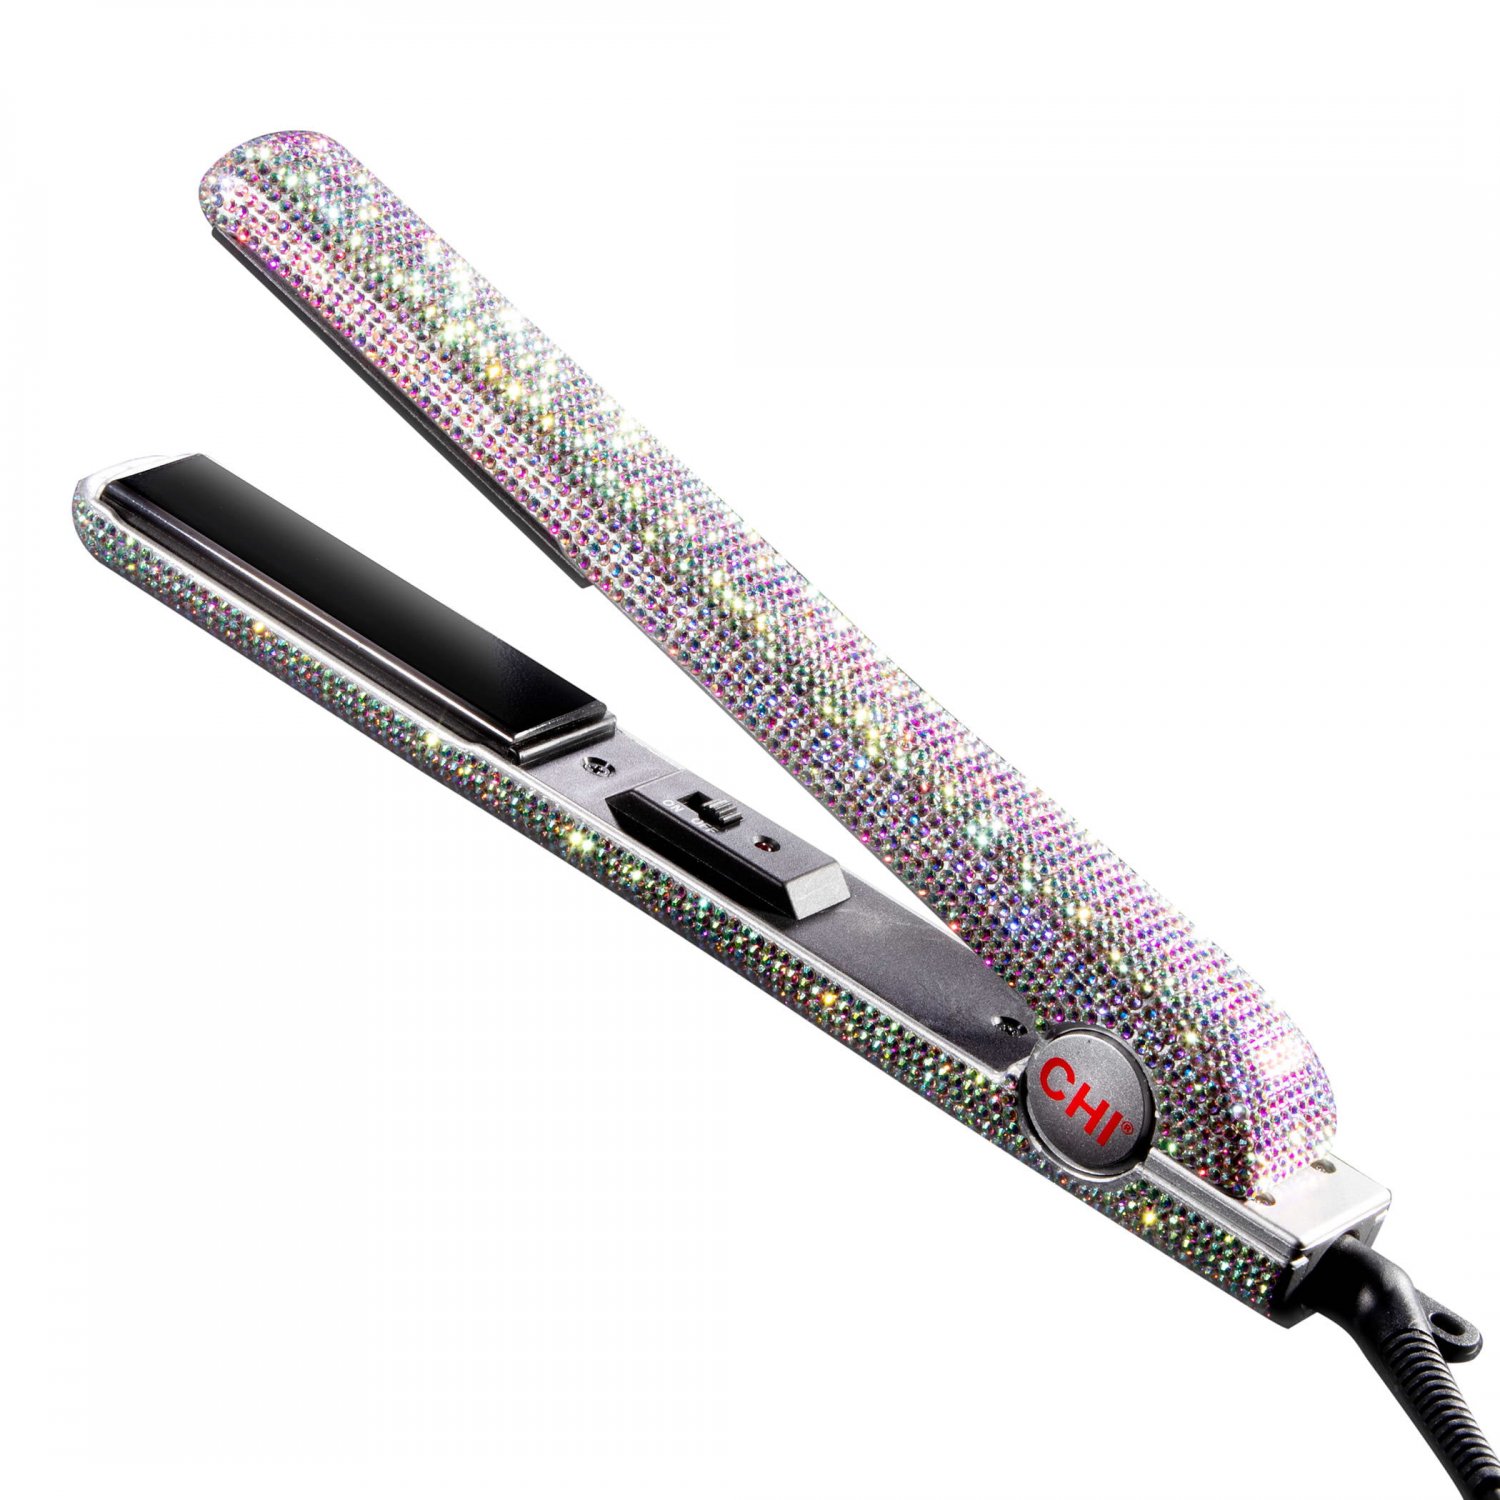 CHI 1" The Sparkler Ceramic Hairstyling Iron, Special Edition